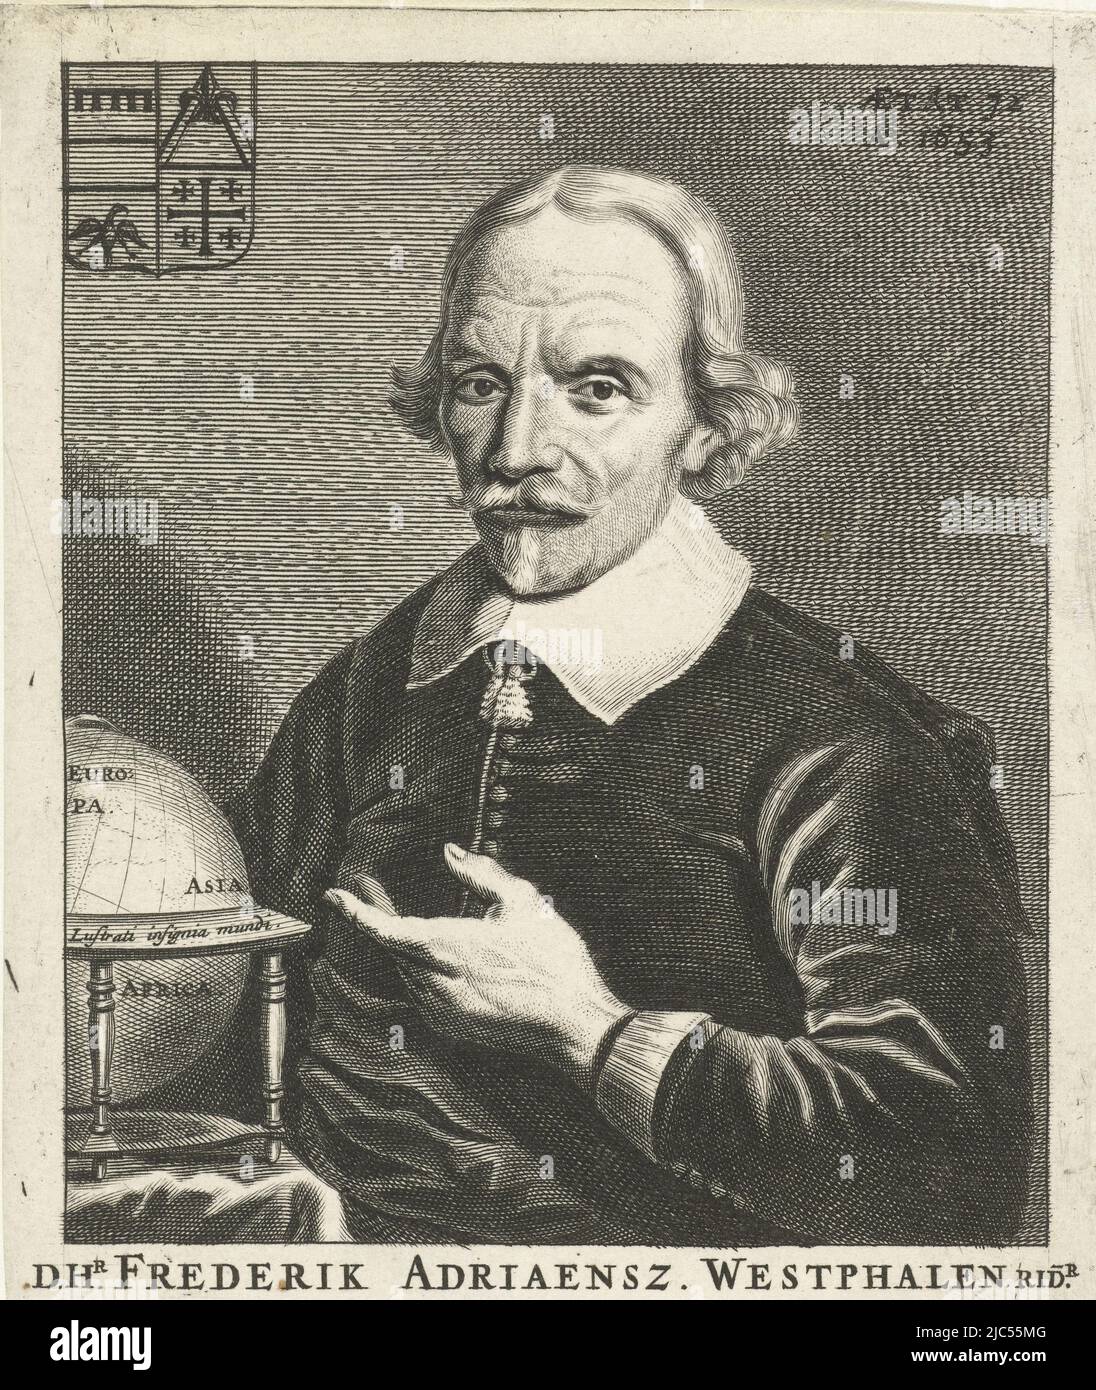 Portrait of Frederik Adriaensz. Westphalen at age 72, next to him a globe. In the upper left corner his coat of arms. Below the portrait a four-line verse in Dutch drawn by G. Brandt: Sursum Corda, Portrait of Frederik Adriaensz. Westphalen at the age of 72, print maker: Hendrik Bary, (mentioned on object), Geeraert Brandt (I), (mentioned on object), Netherlands, 1657 - 1707, paper, engraving, h 161 mm × w 114 mm Stock Photo